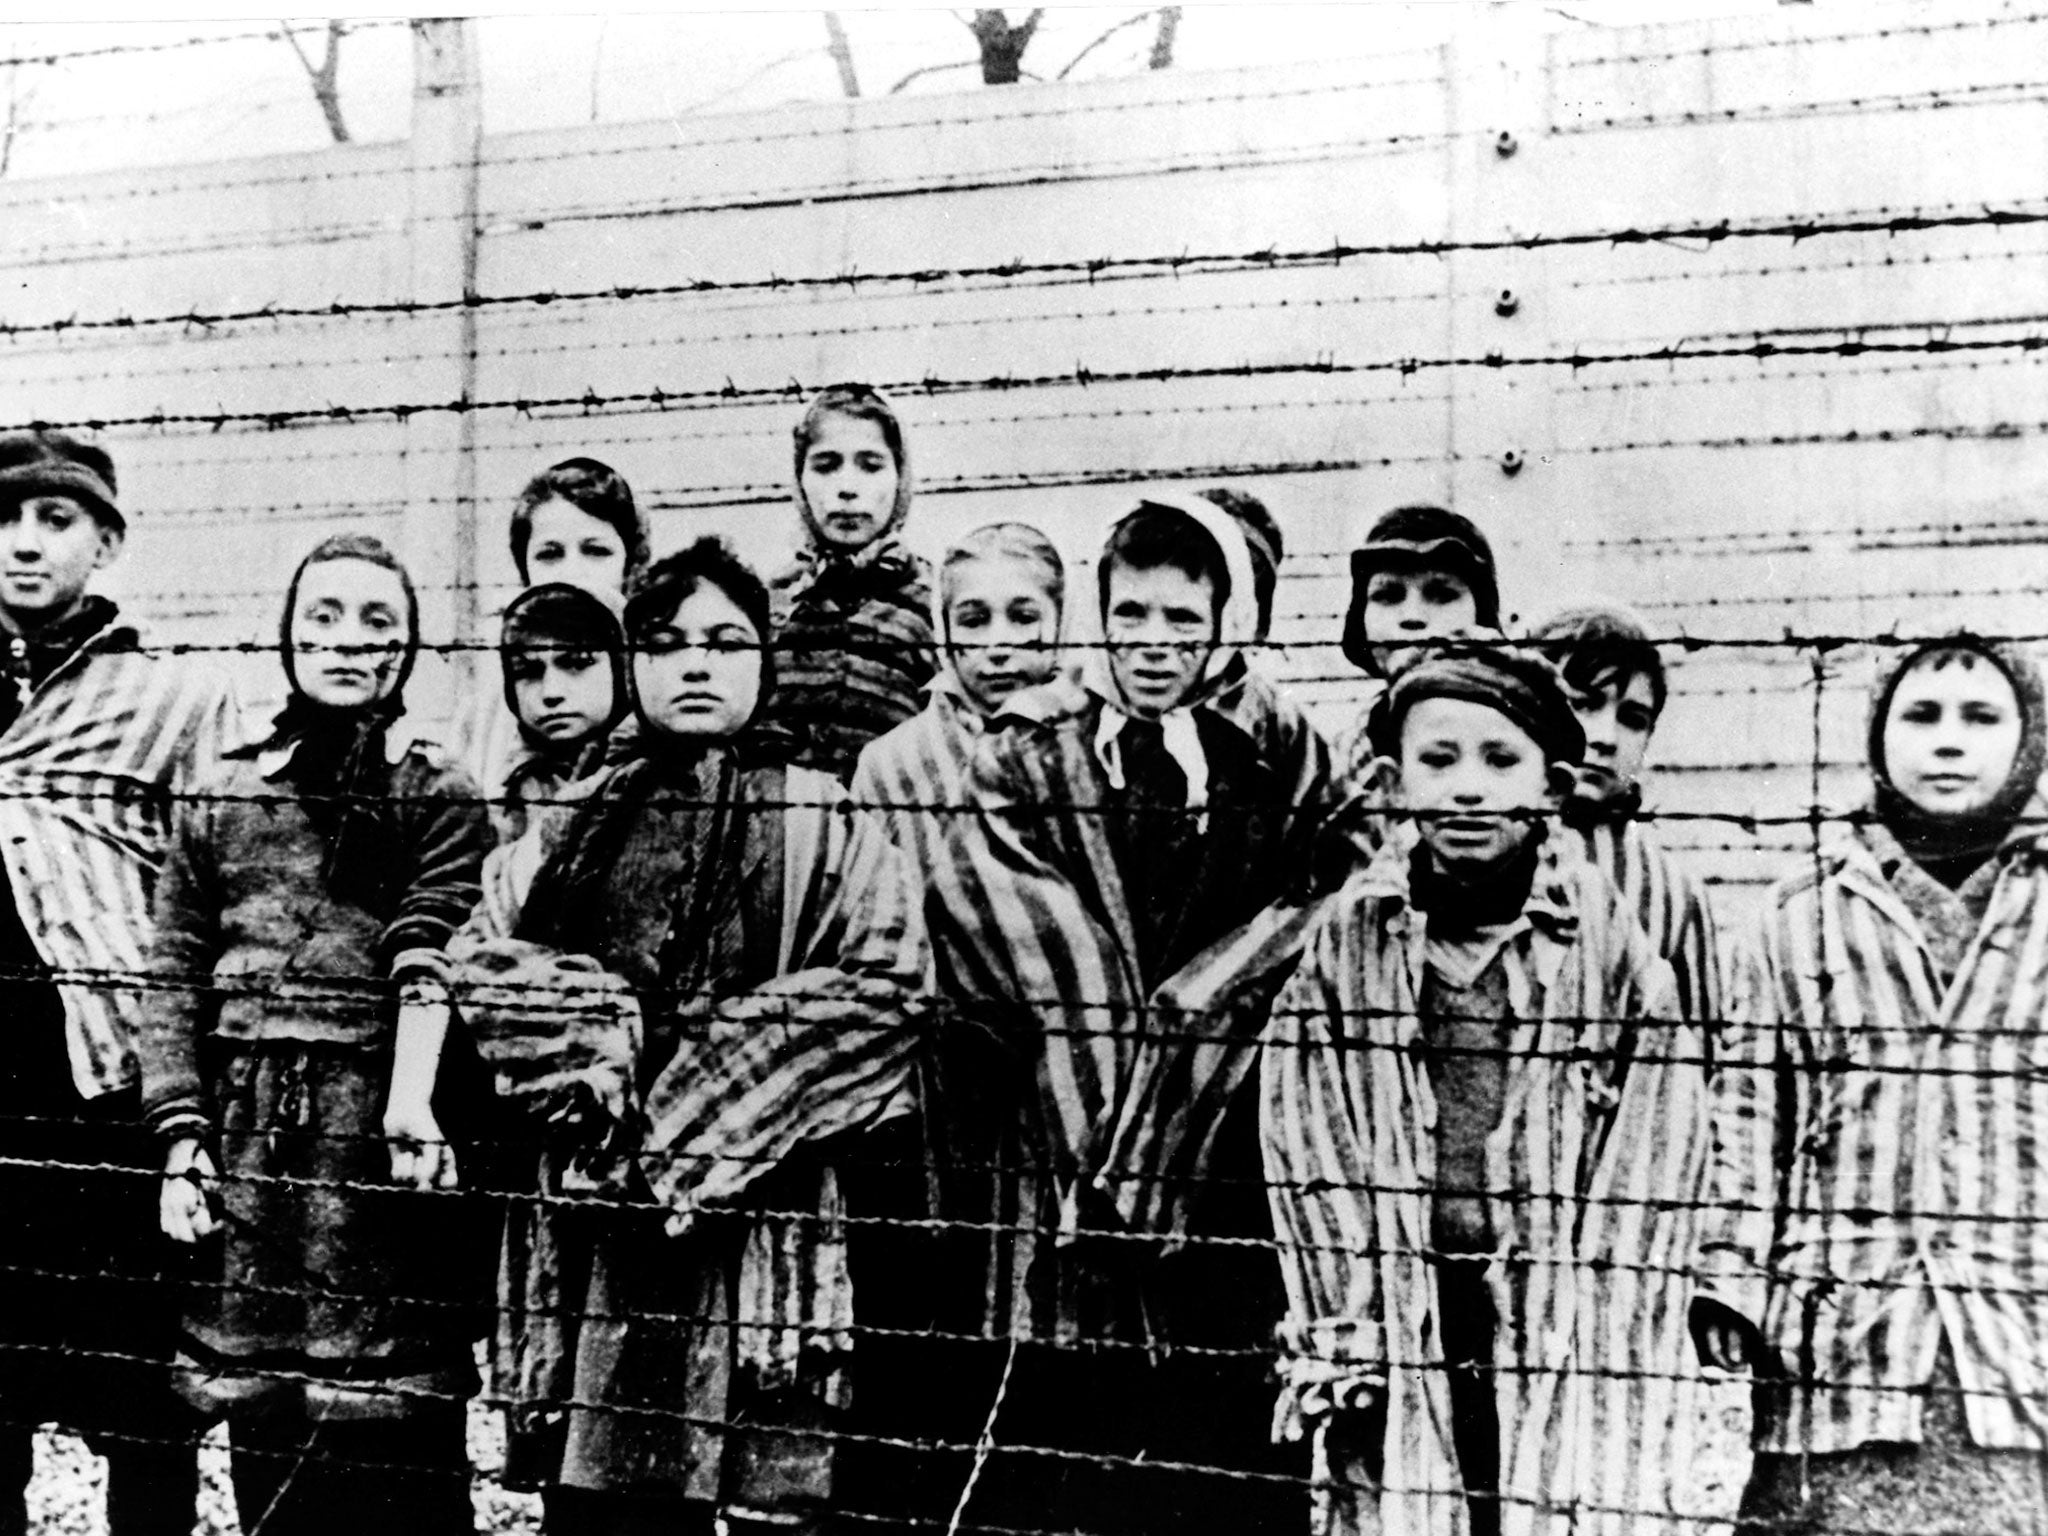 A picture of child prisoners taken just after the liberation of Auschwitz by the Soviet army in January 1945